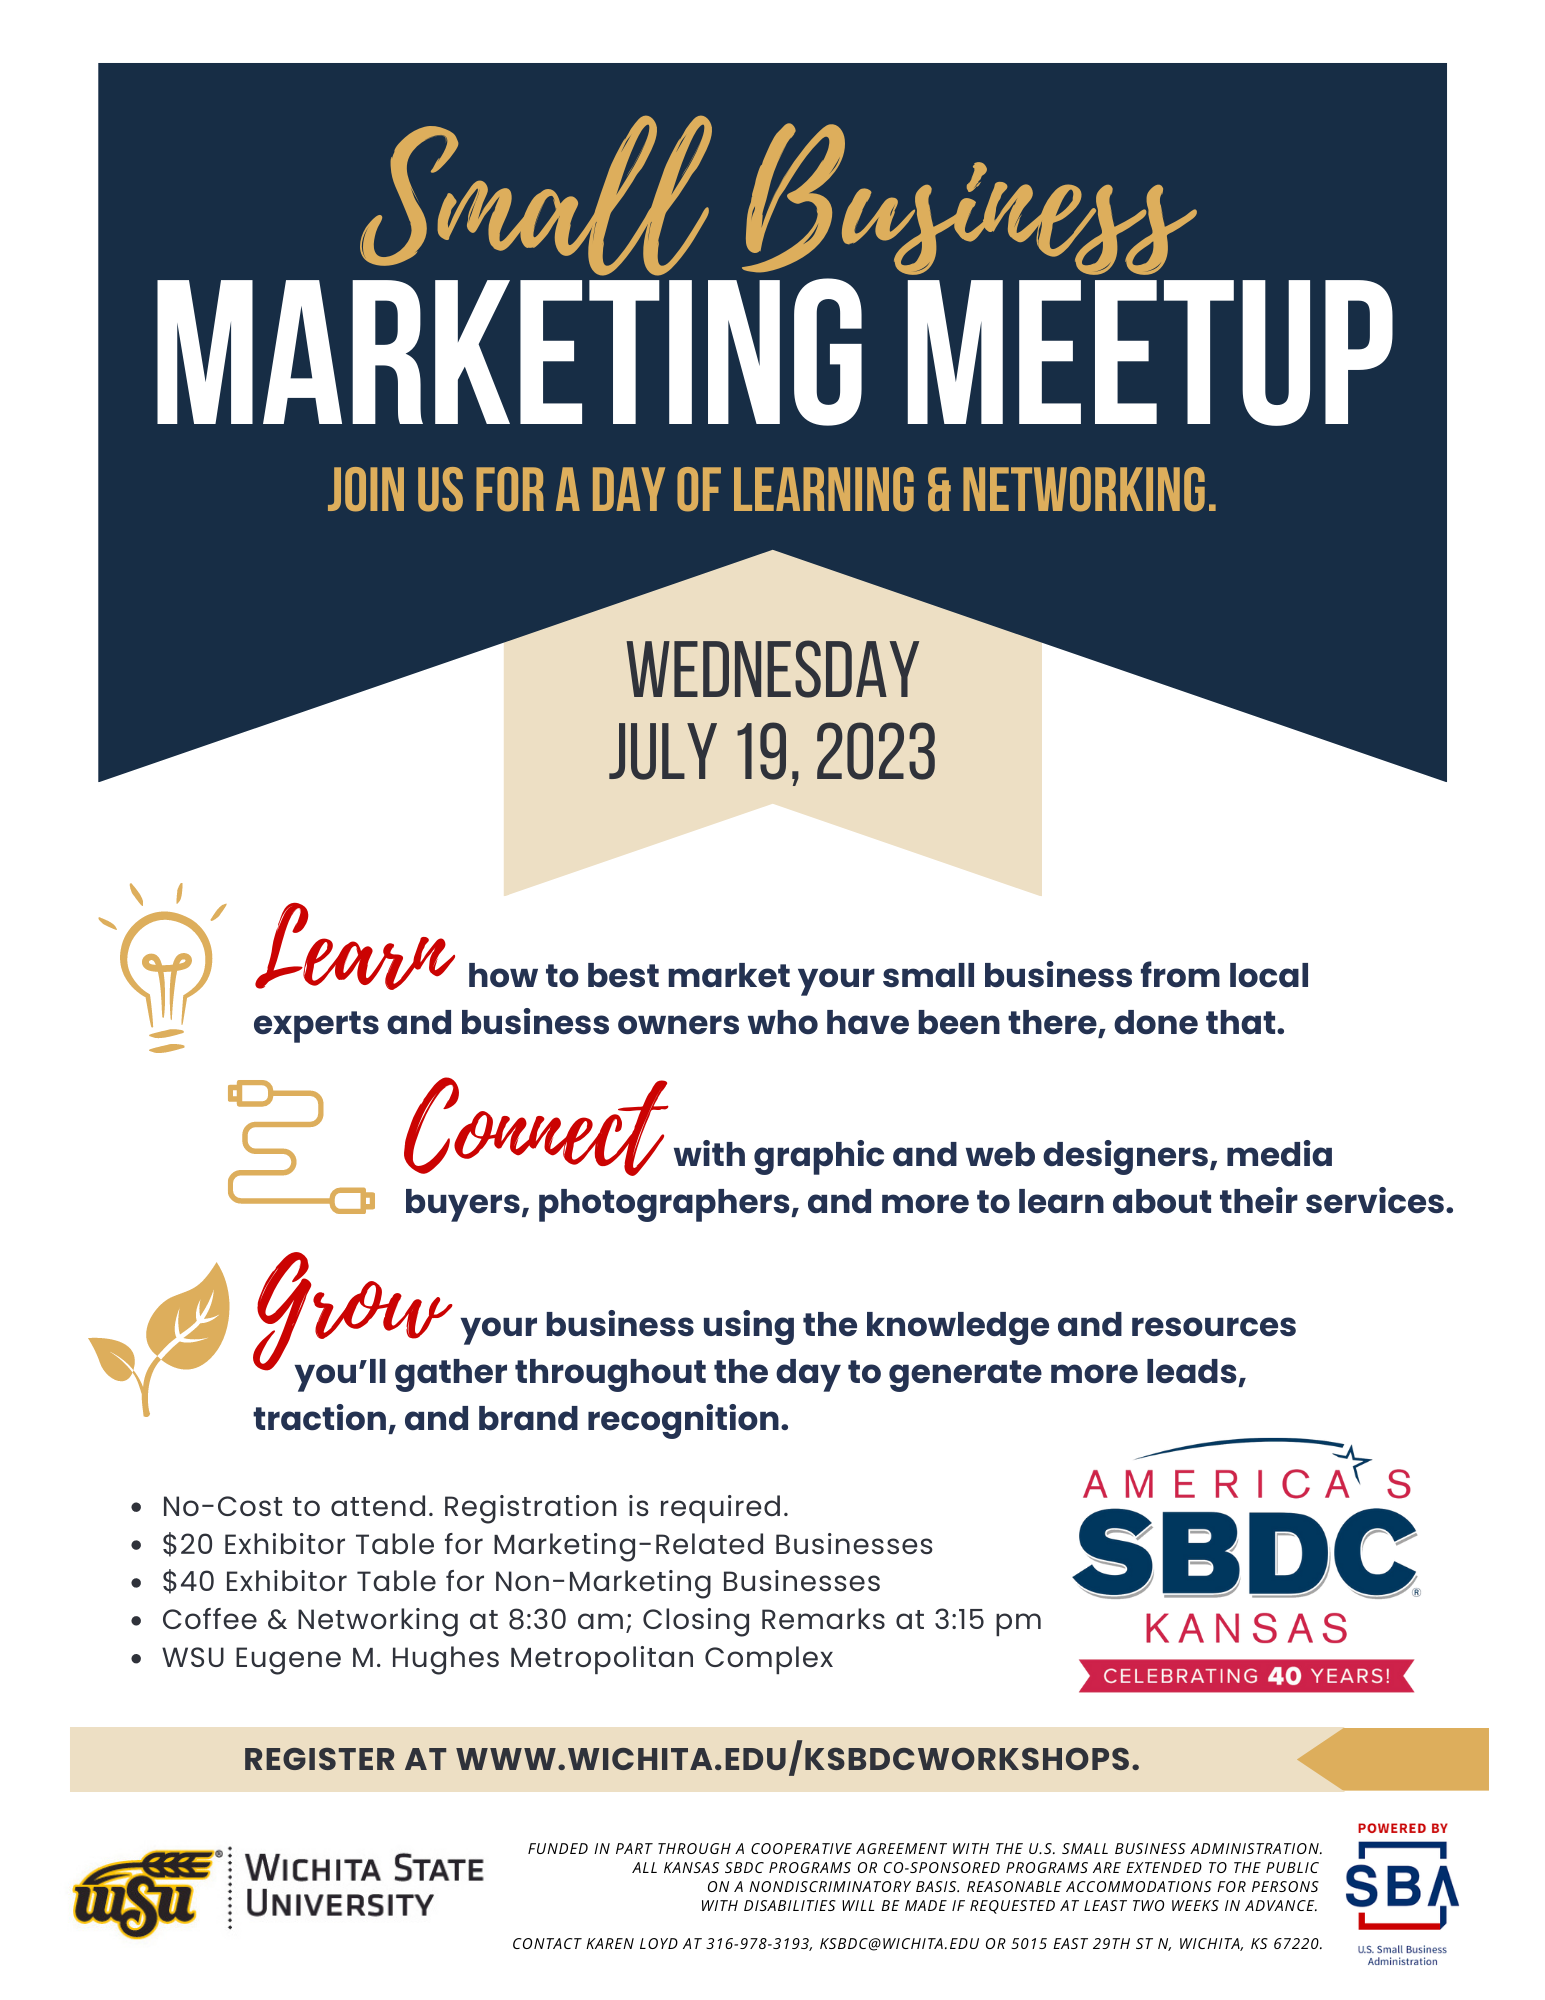 Sample flyer picture: WSU KSBDC 2023 Small Business Marketing Meetup